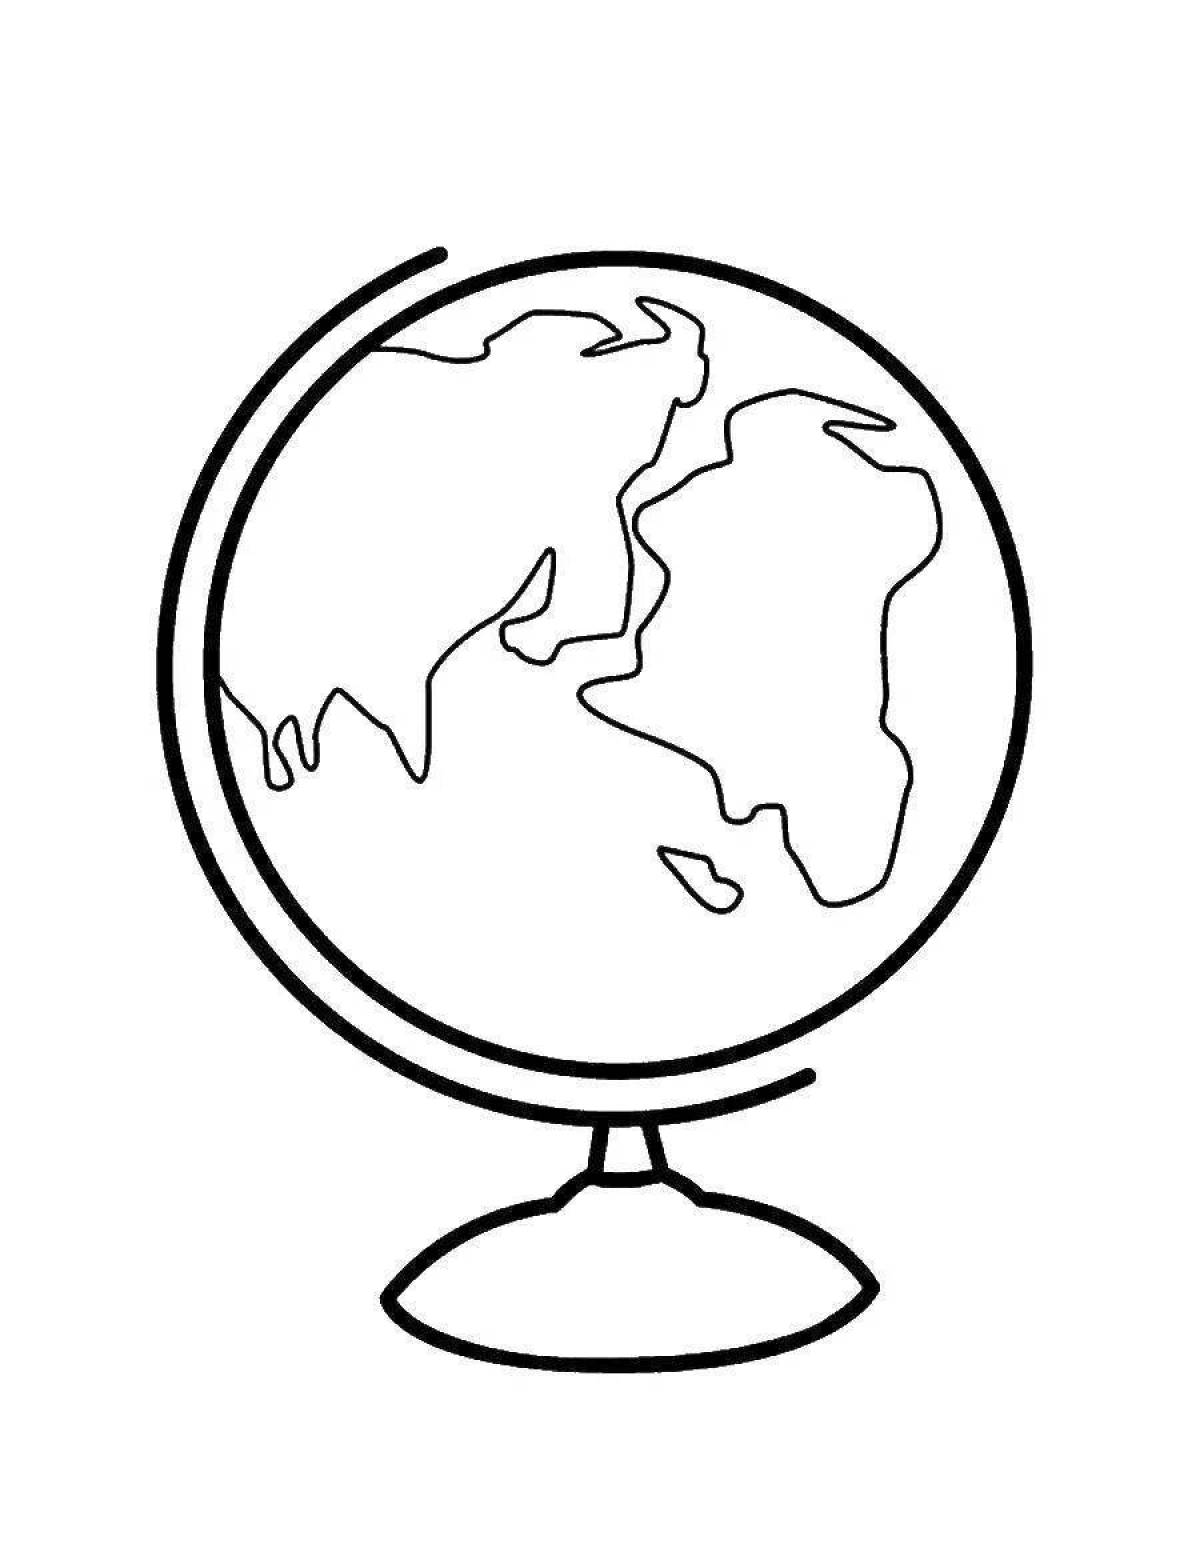 Dynamic geography coloring page